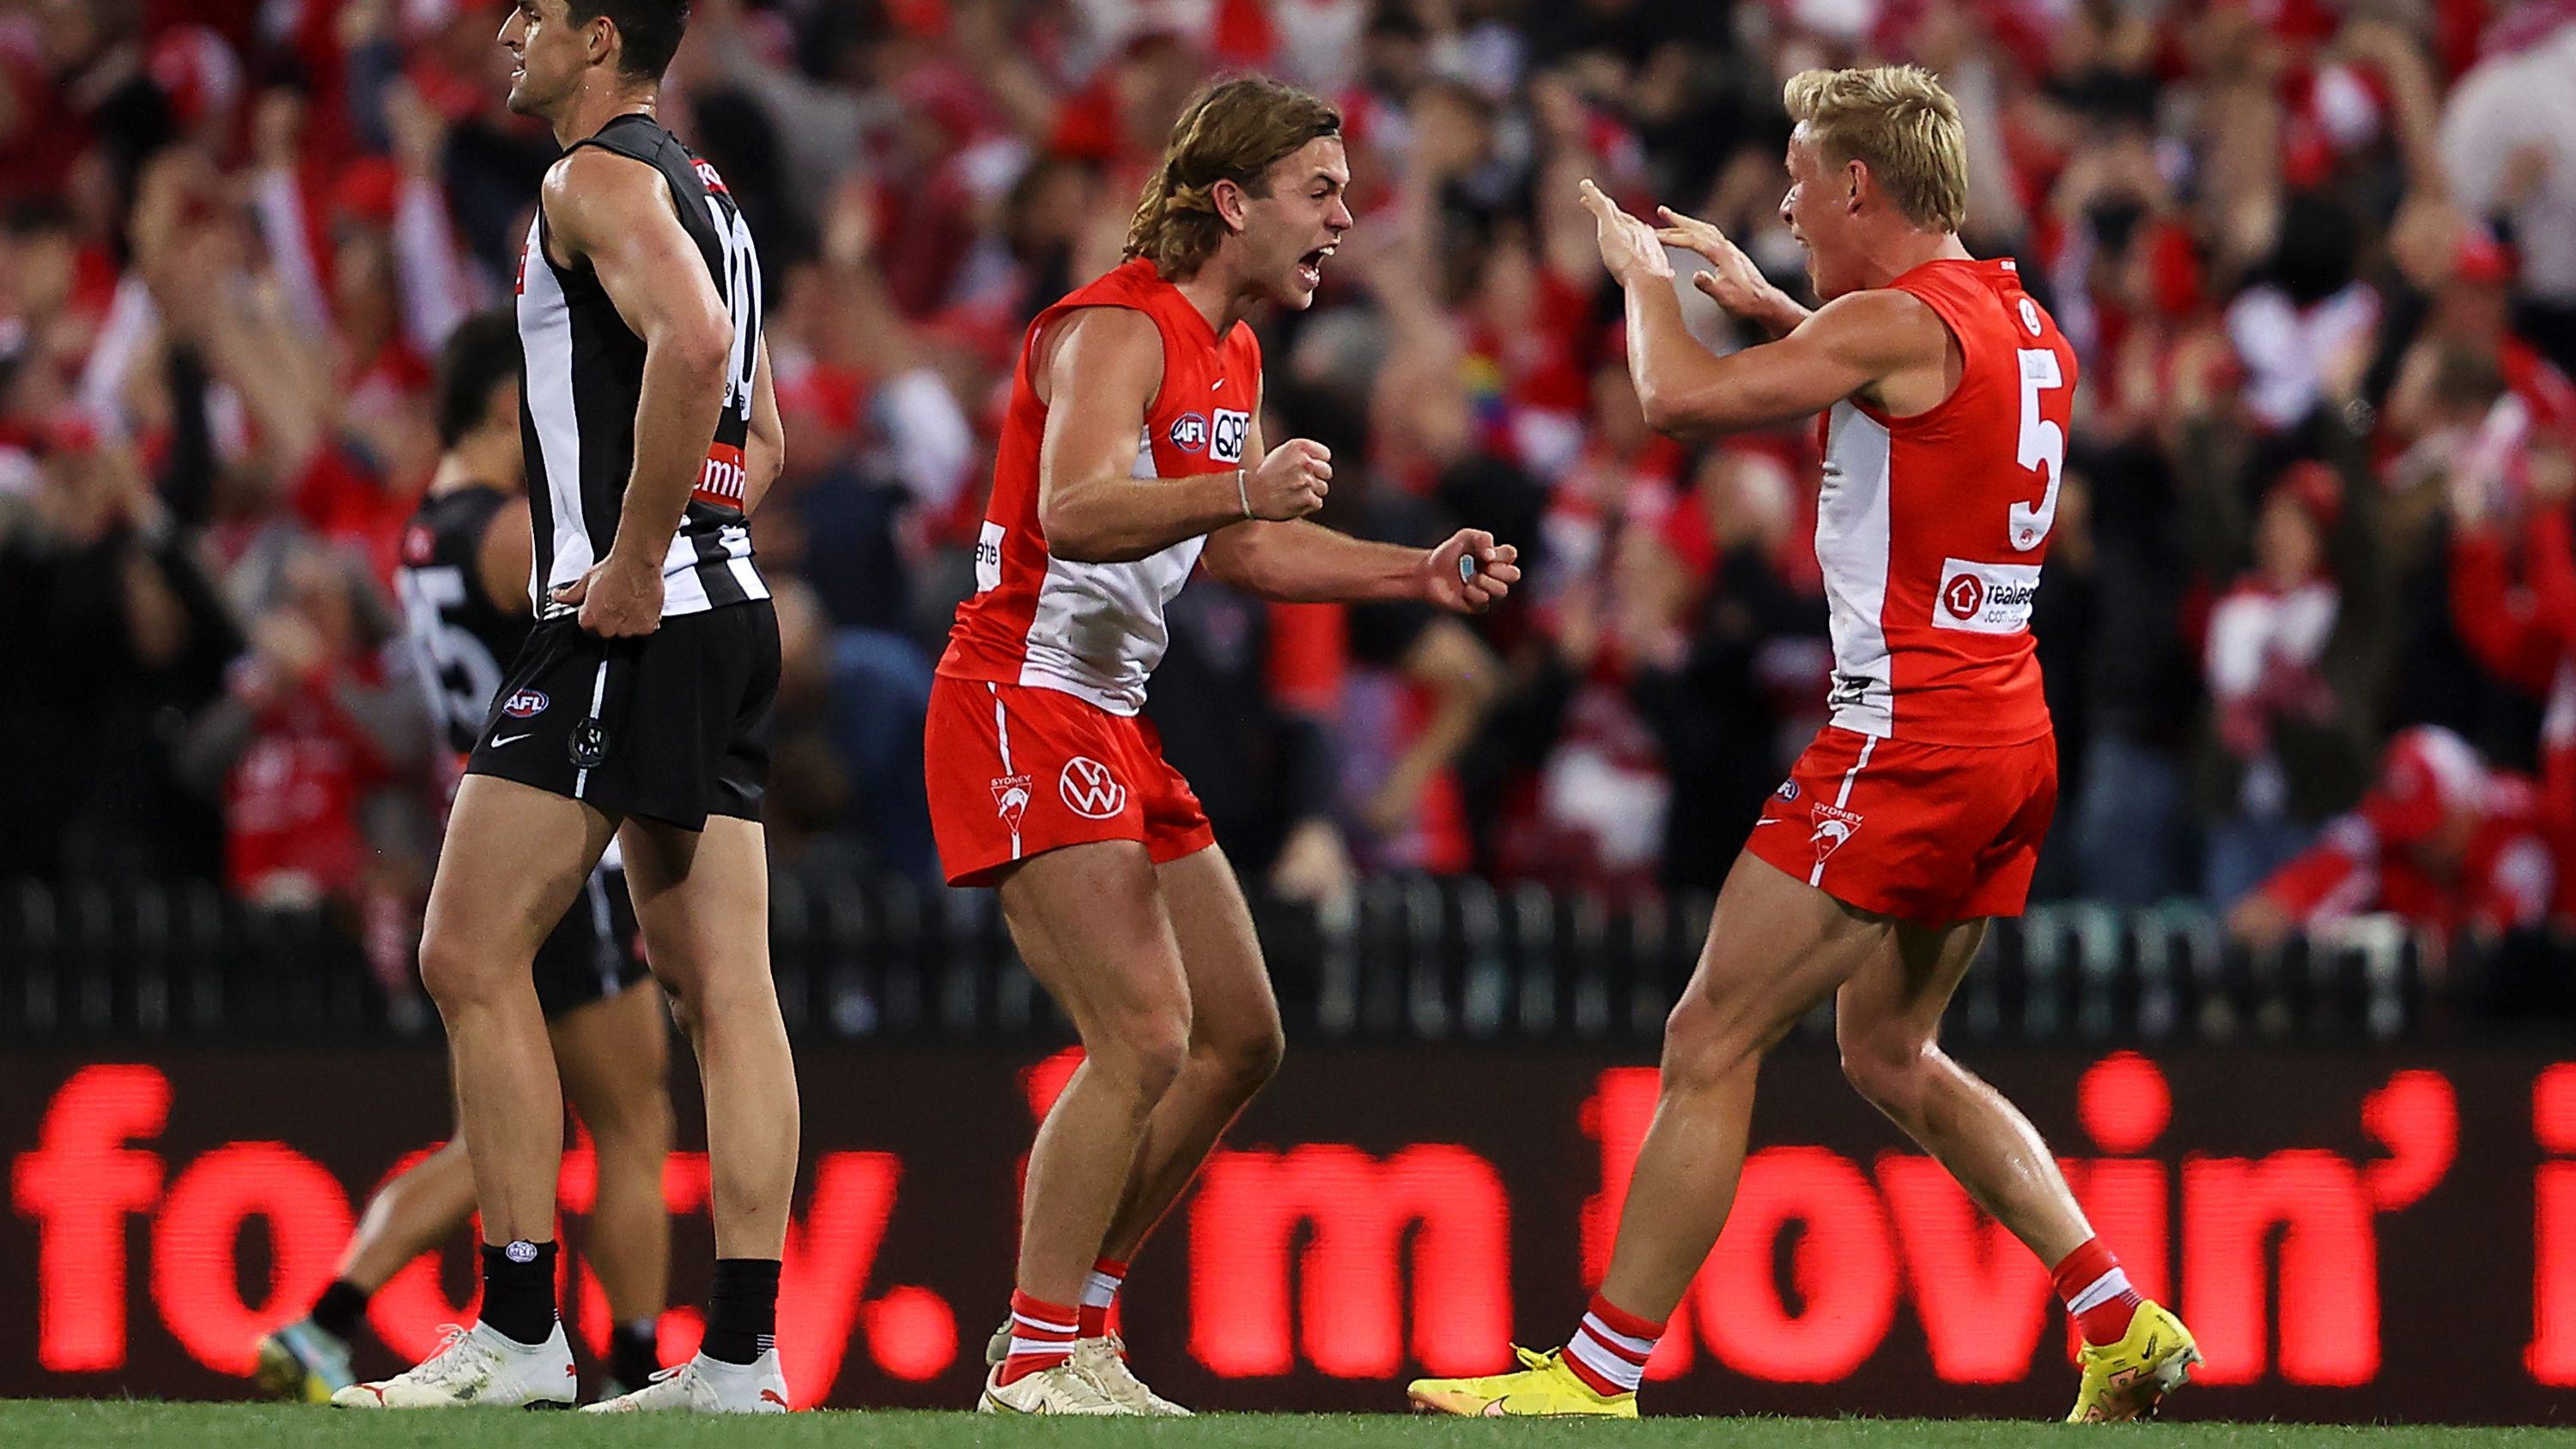 Sydney Swans hold off last push from Collingwood to secure grand final spot 